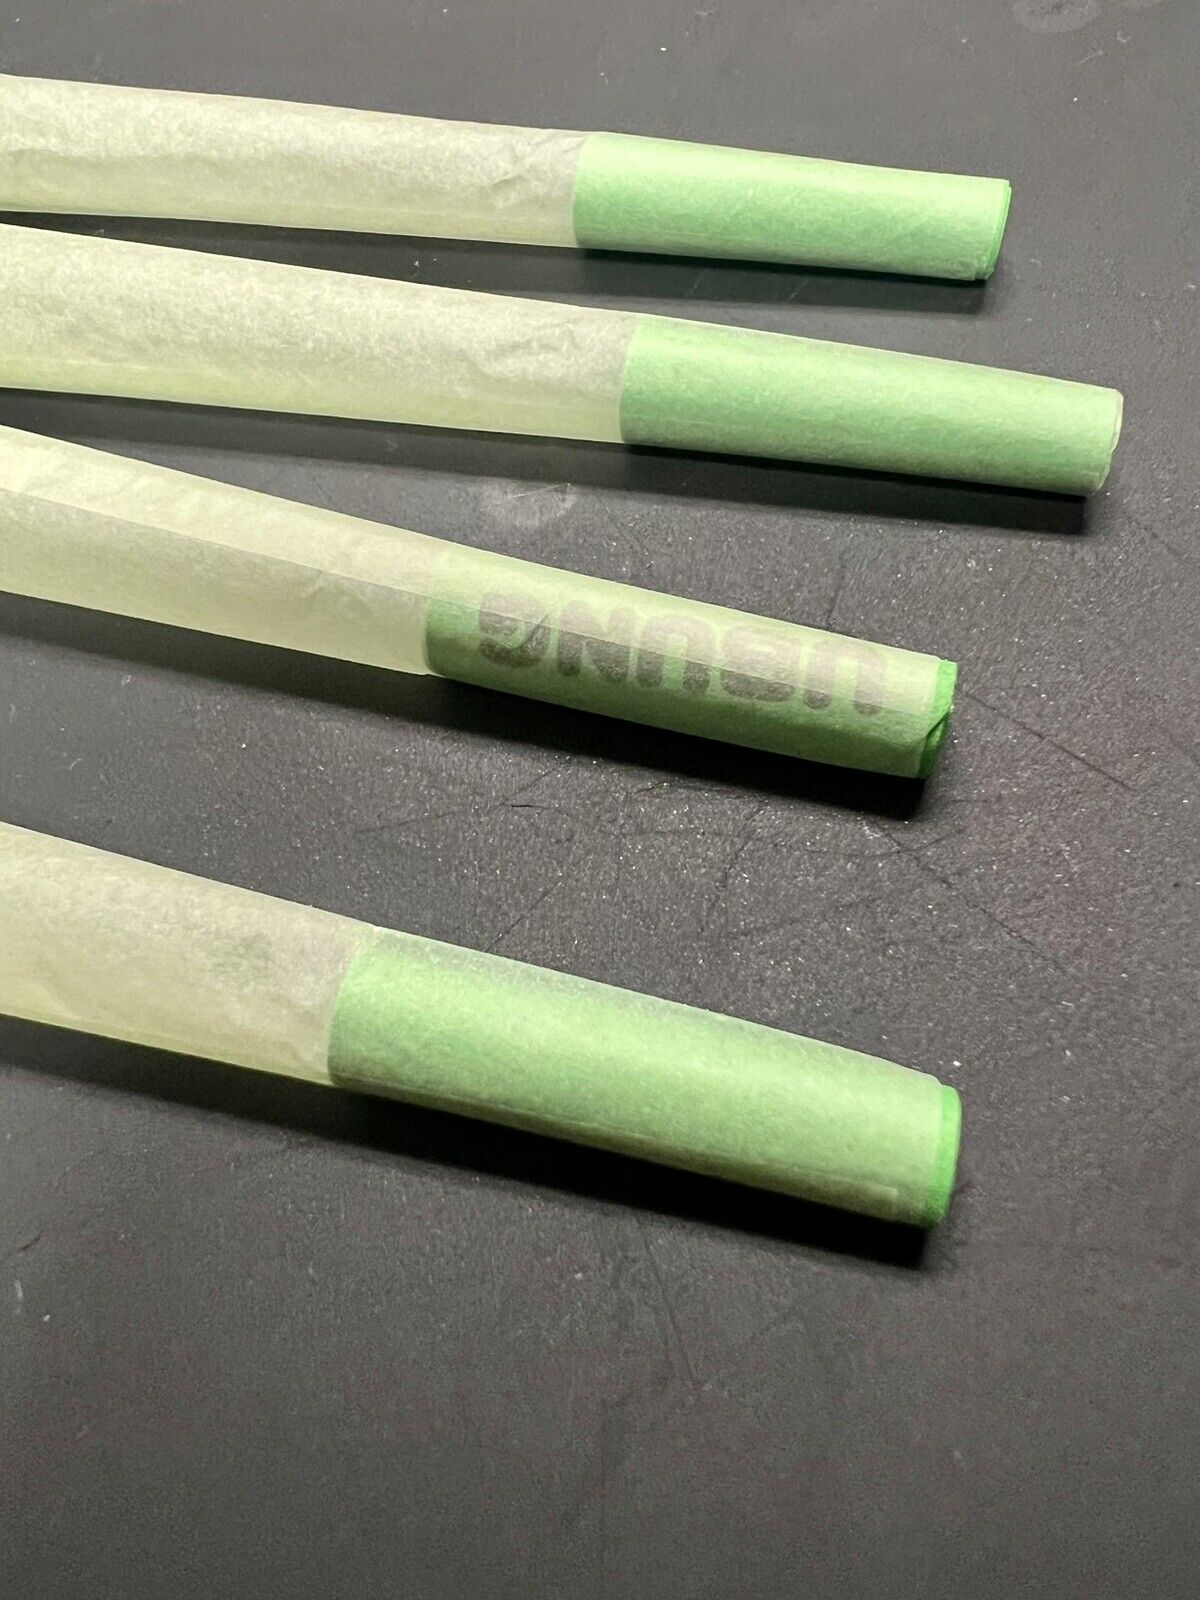 Ubung Green 110mm King Size Unrefined Natural Papers Rolling 4 Cones  FREE S/H